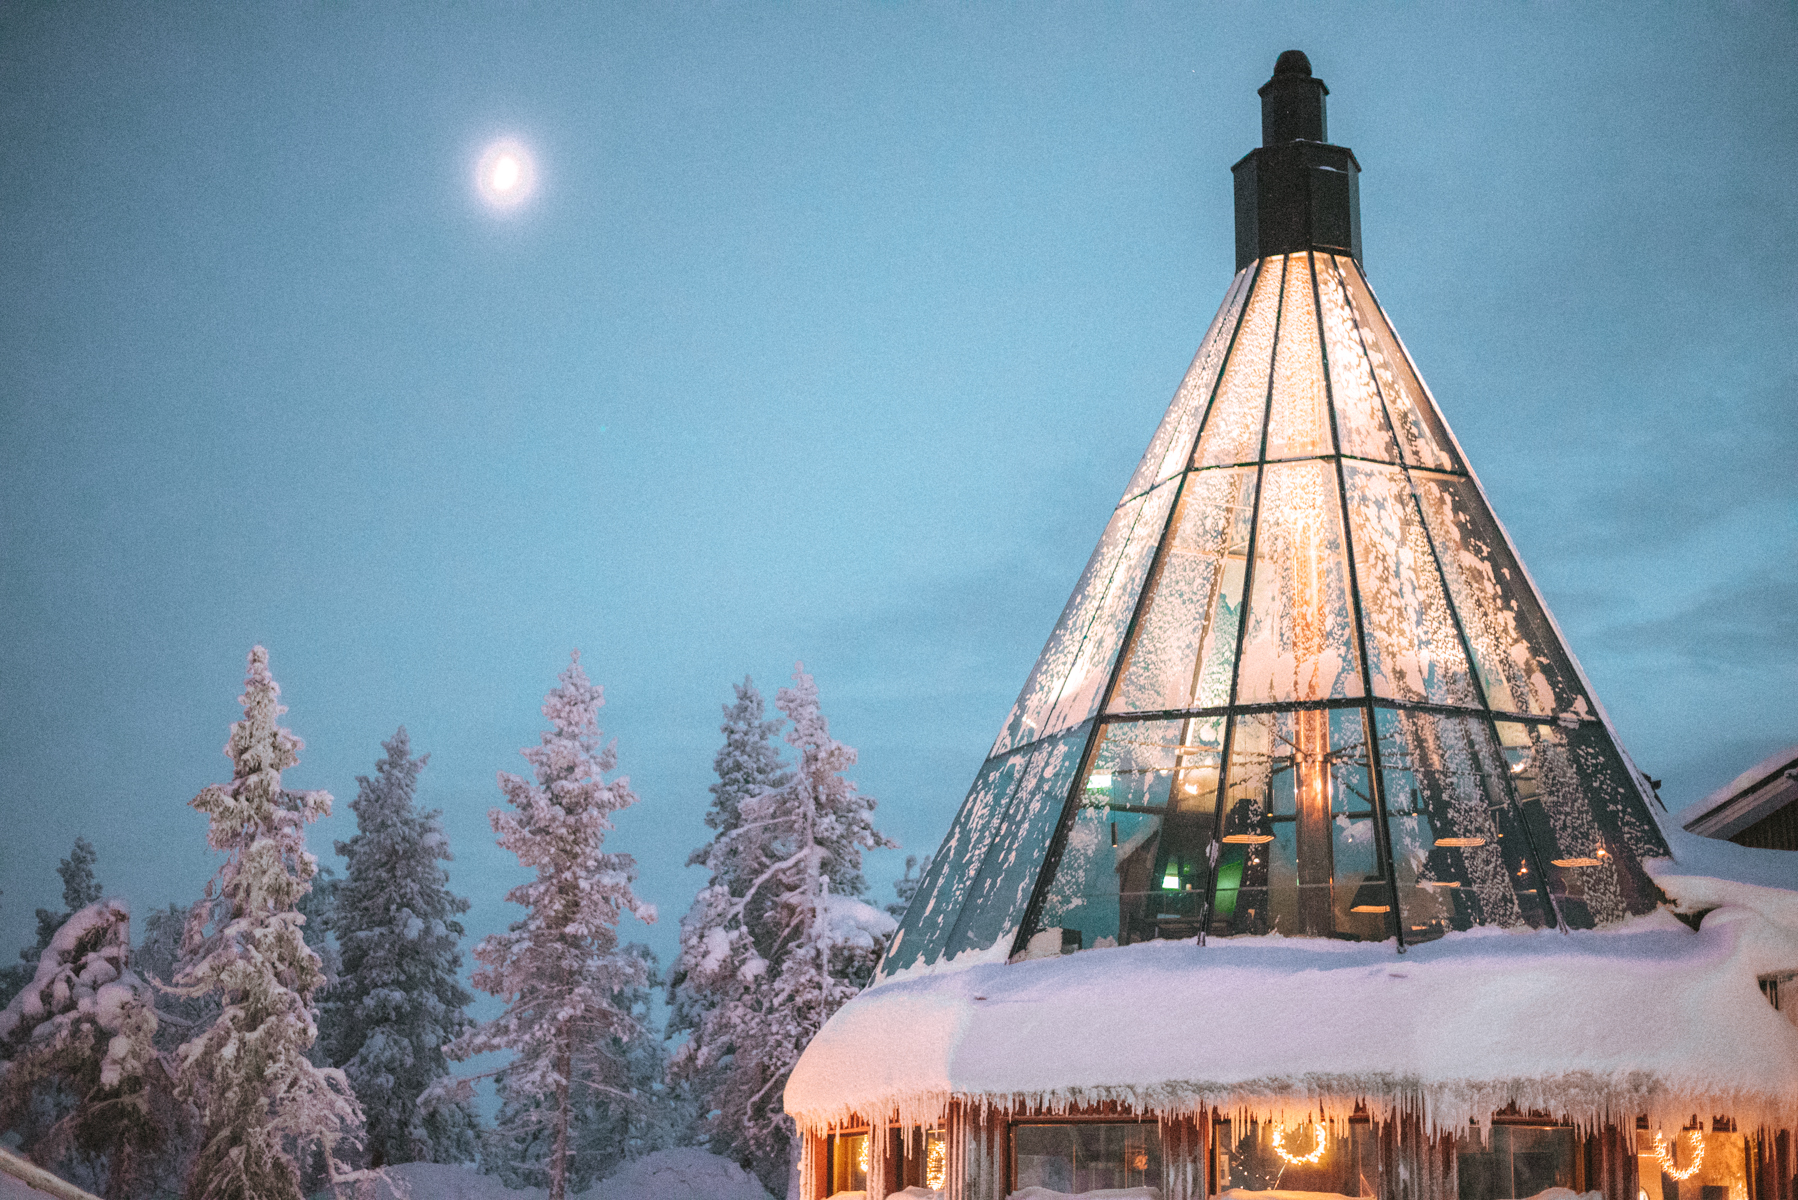 Alyssa Campanella of The A List blog visits the romantic glass igloo at Levin Iglut in Levi, Finland